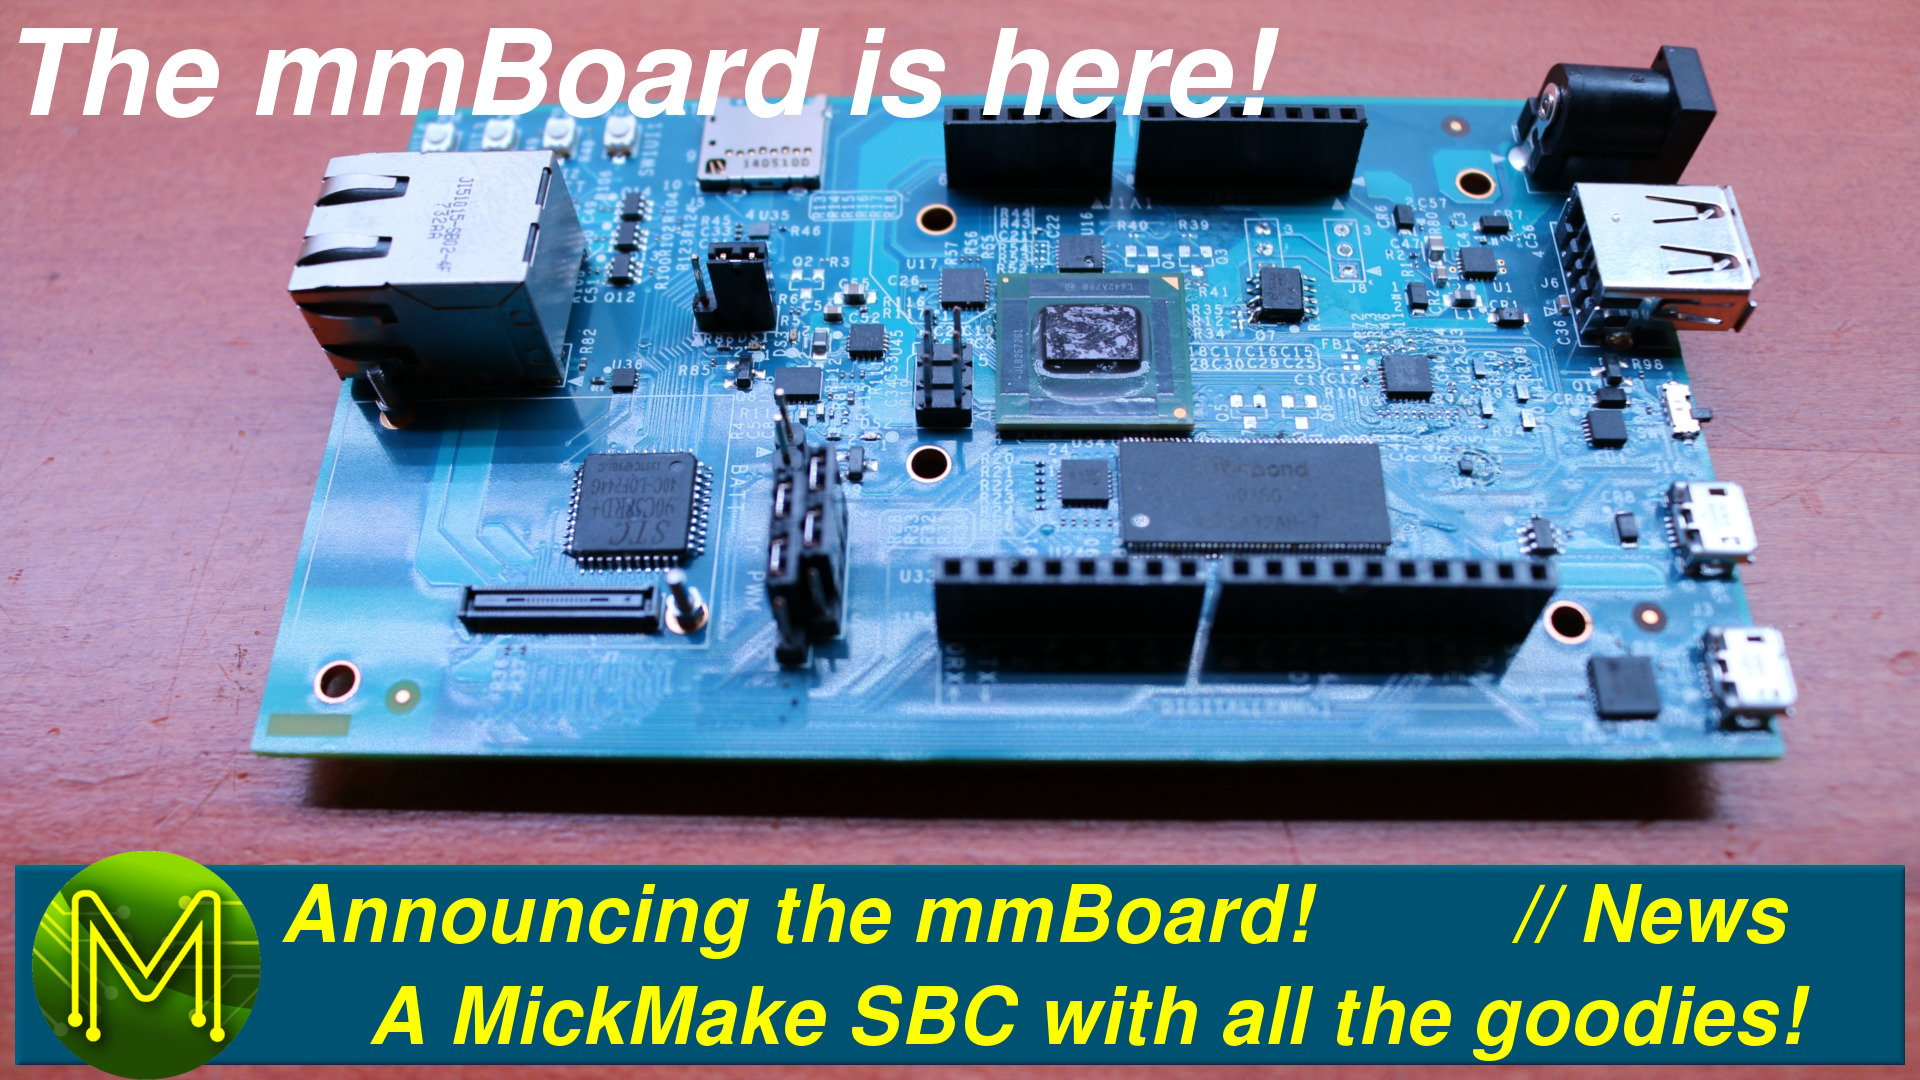 Announcing the mmBoard! A MickMake SBC with all the goodies.